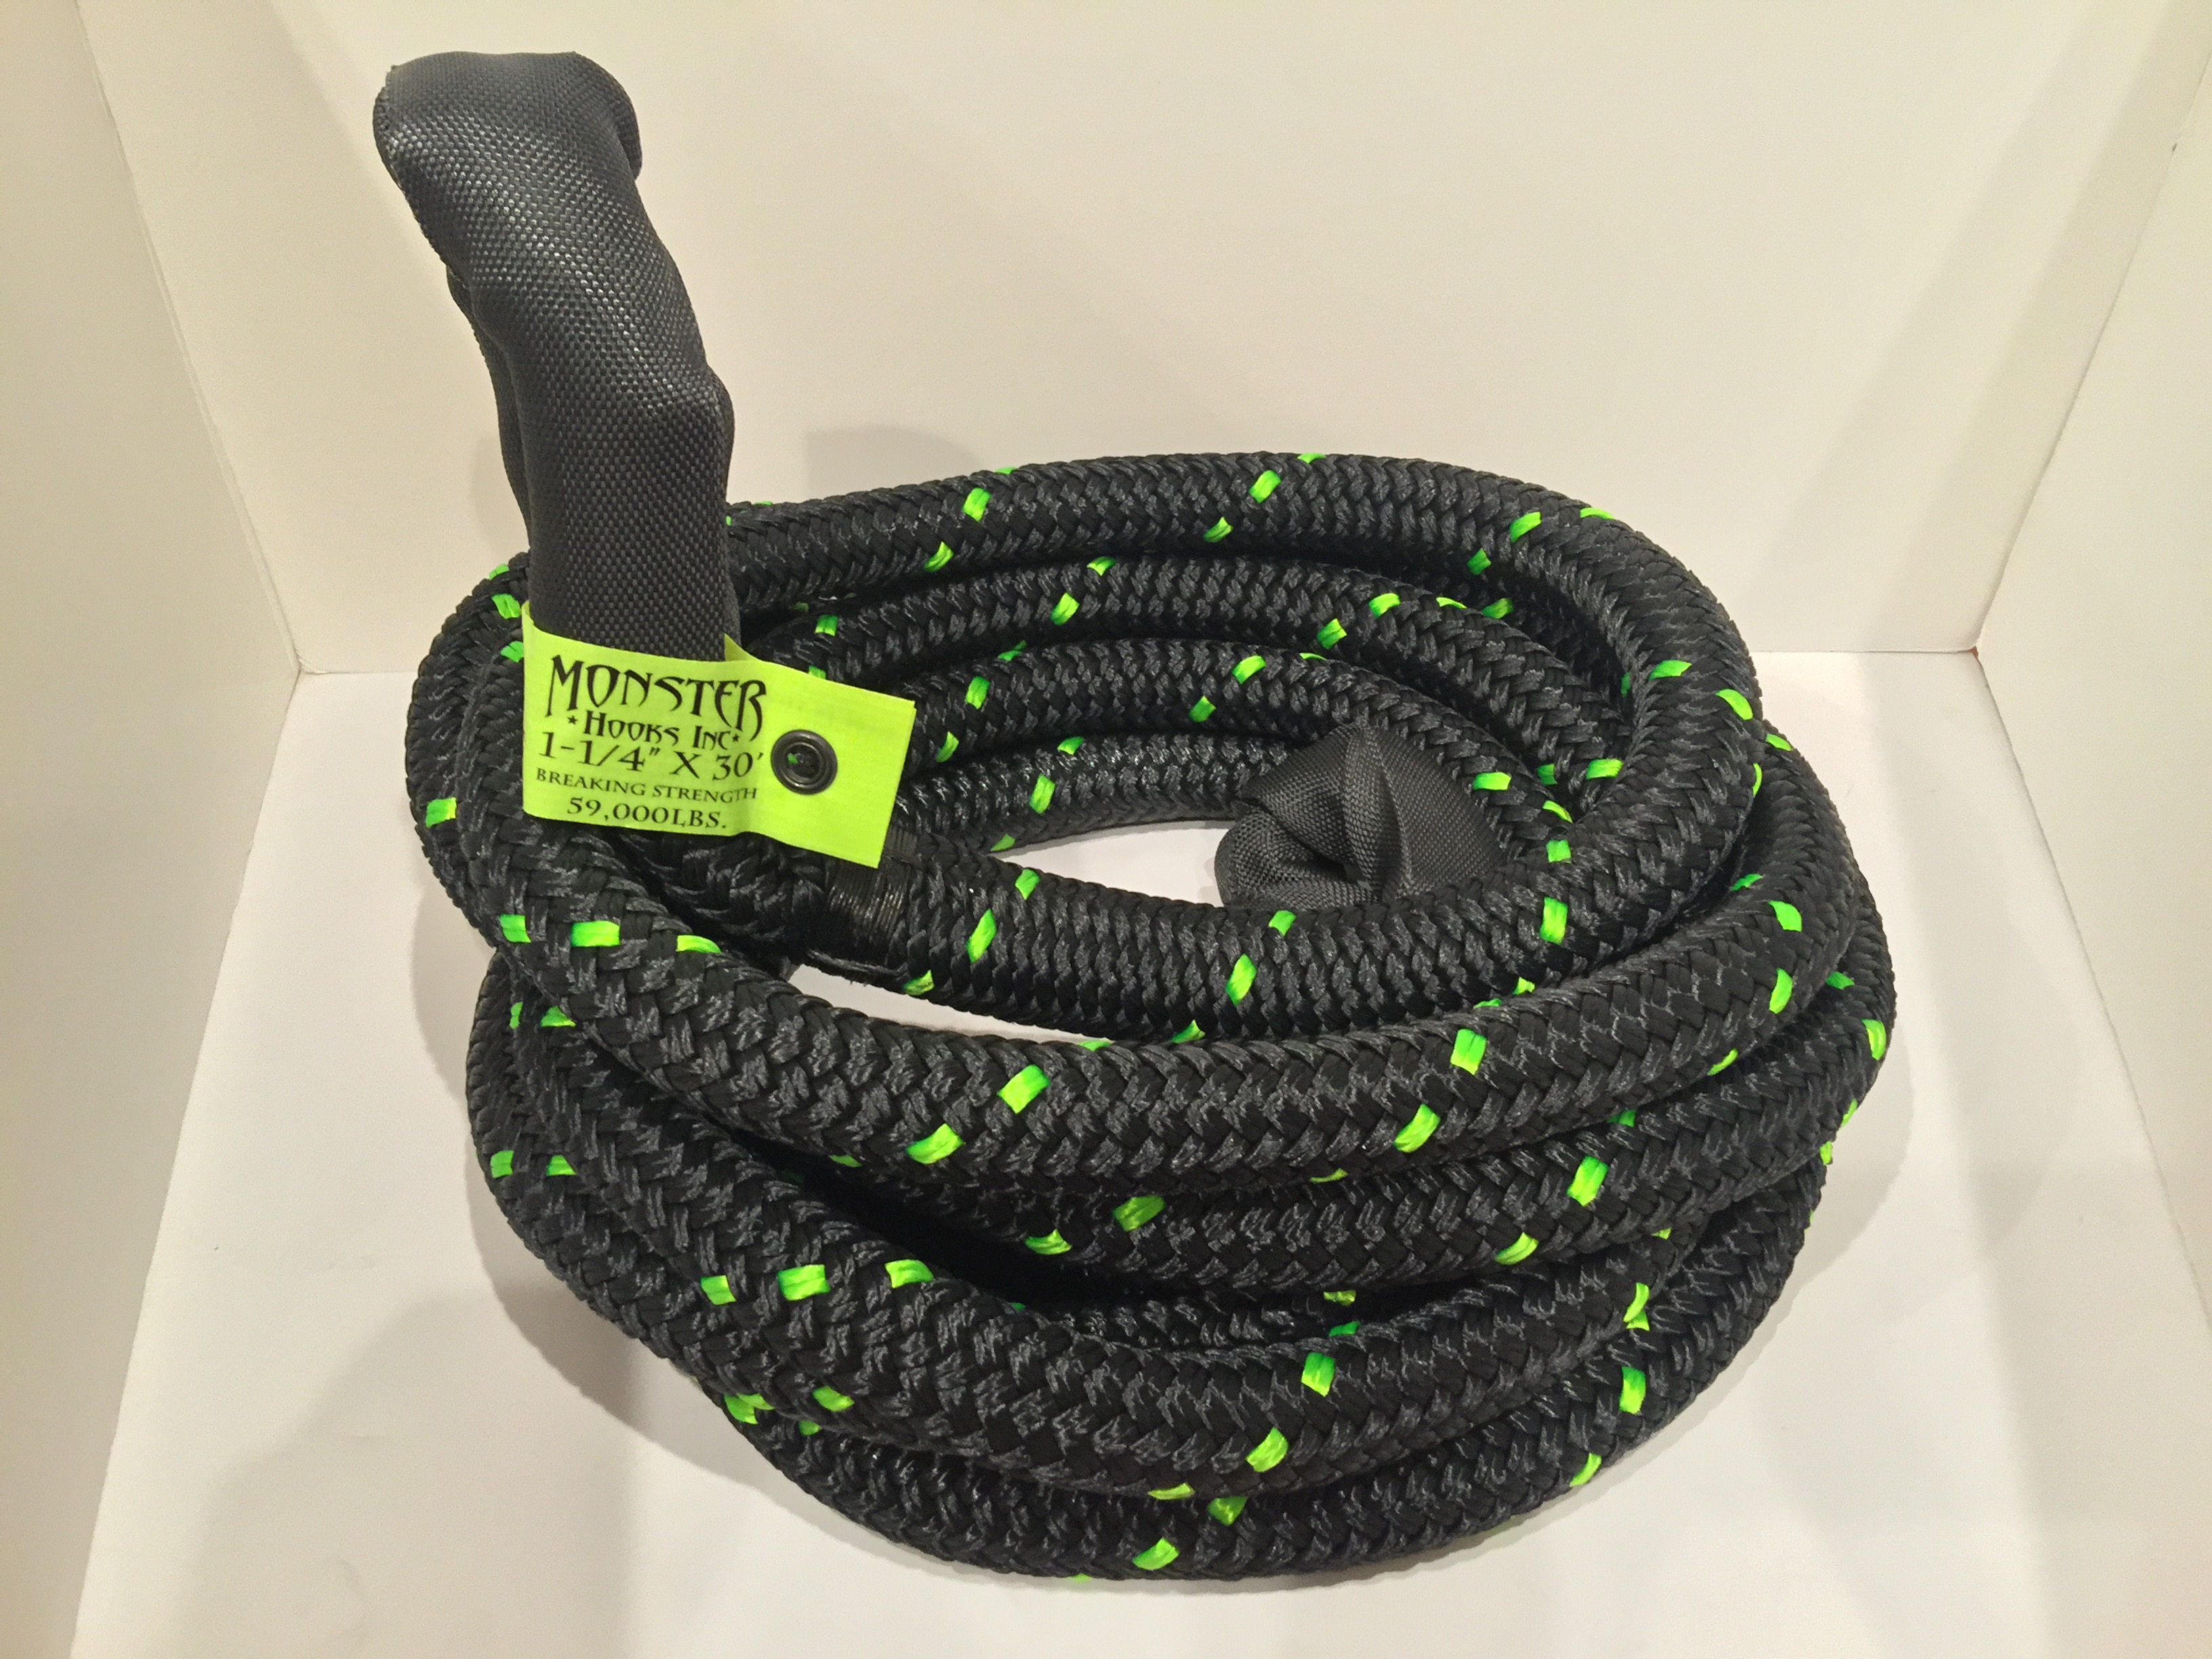 MONSTER RECOVERY ROPE (kinetic) - 1-1/4 inch X 30 ft (VEHICLE RECOVERY)